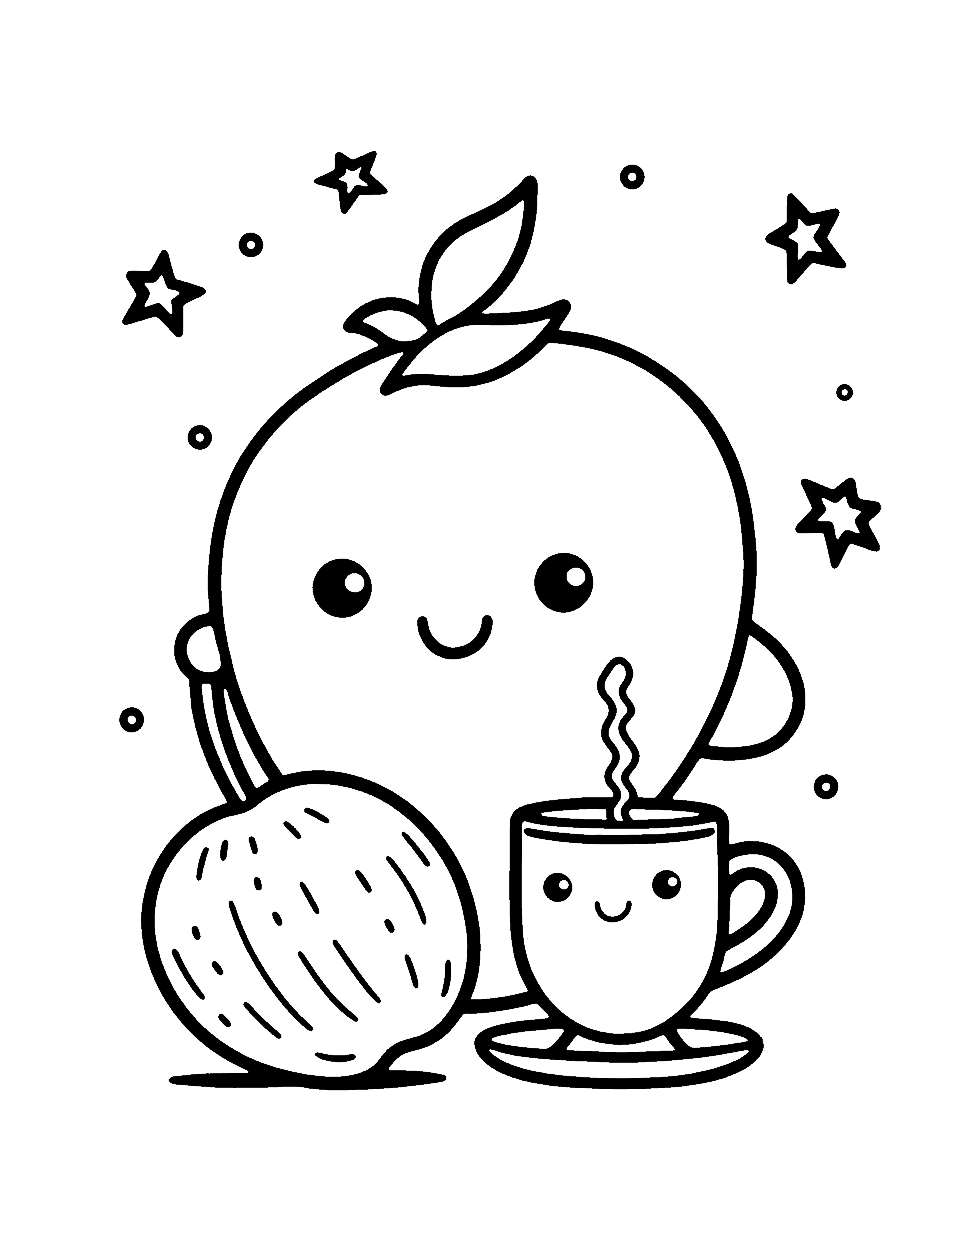 Milk and Fruit Breakfast Kawaii Coloring Page - A Kawaii glass of milk and fruits.